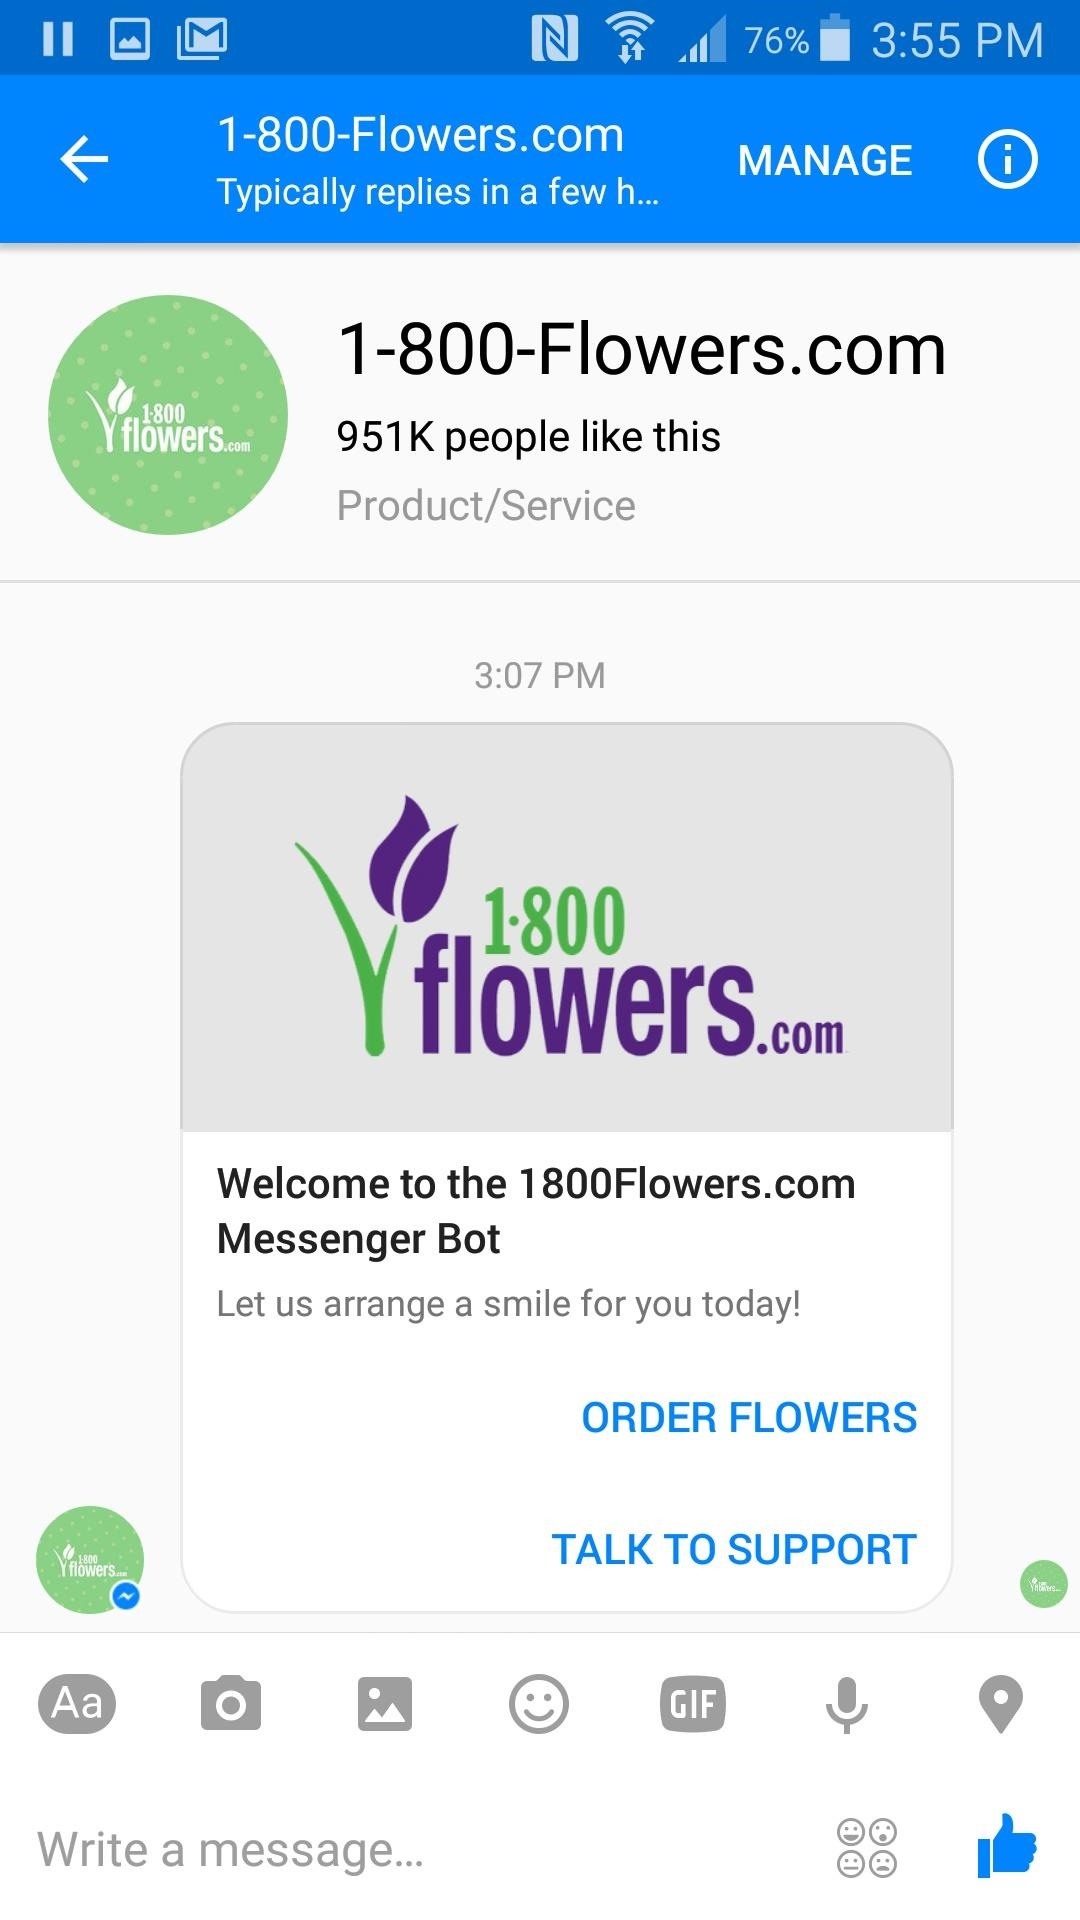 How to Block Spam from Facebook Messenger Bots